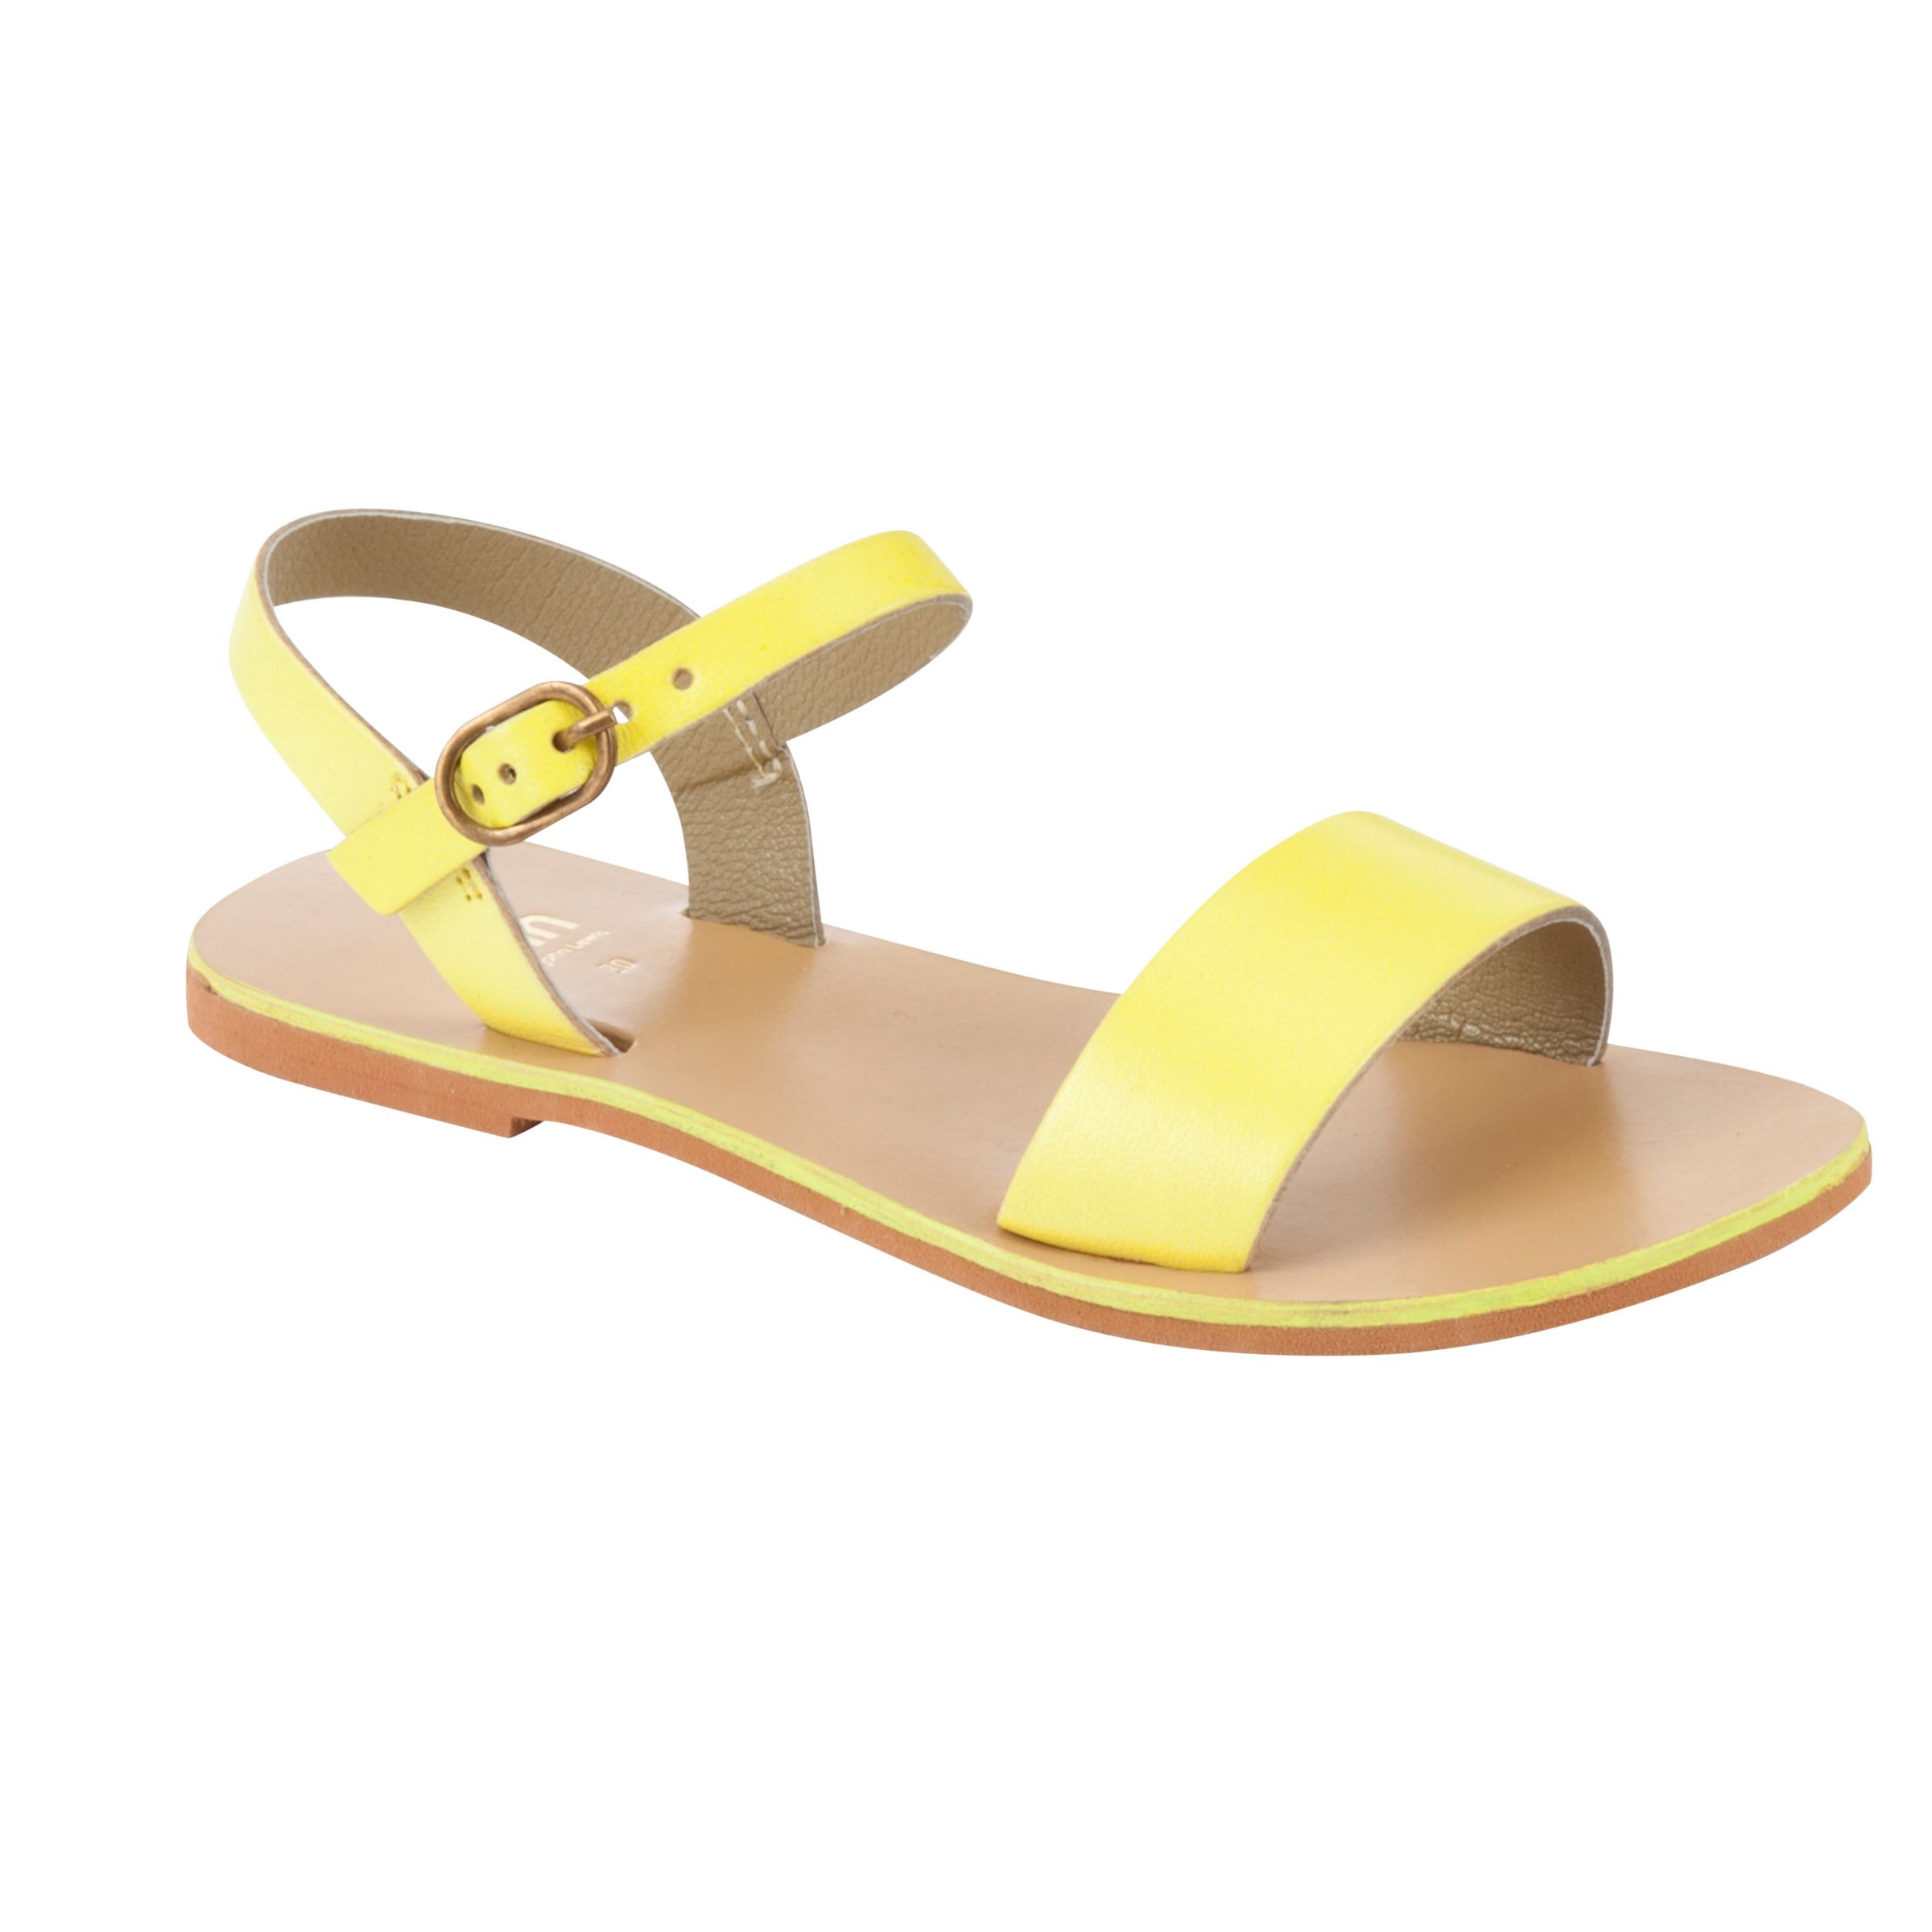 Buy Kin by John Lewis Leather Sandals, Yellow Online at johnlewis.com